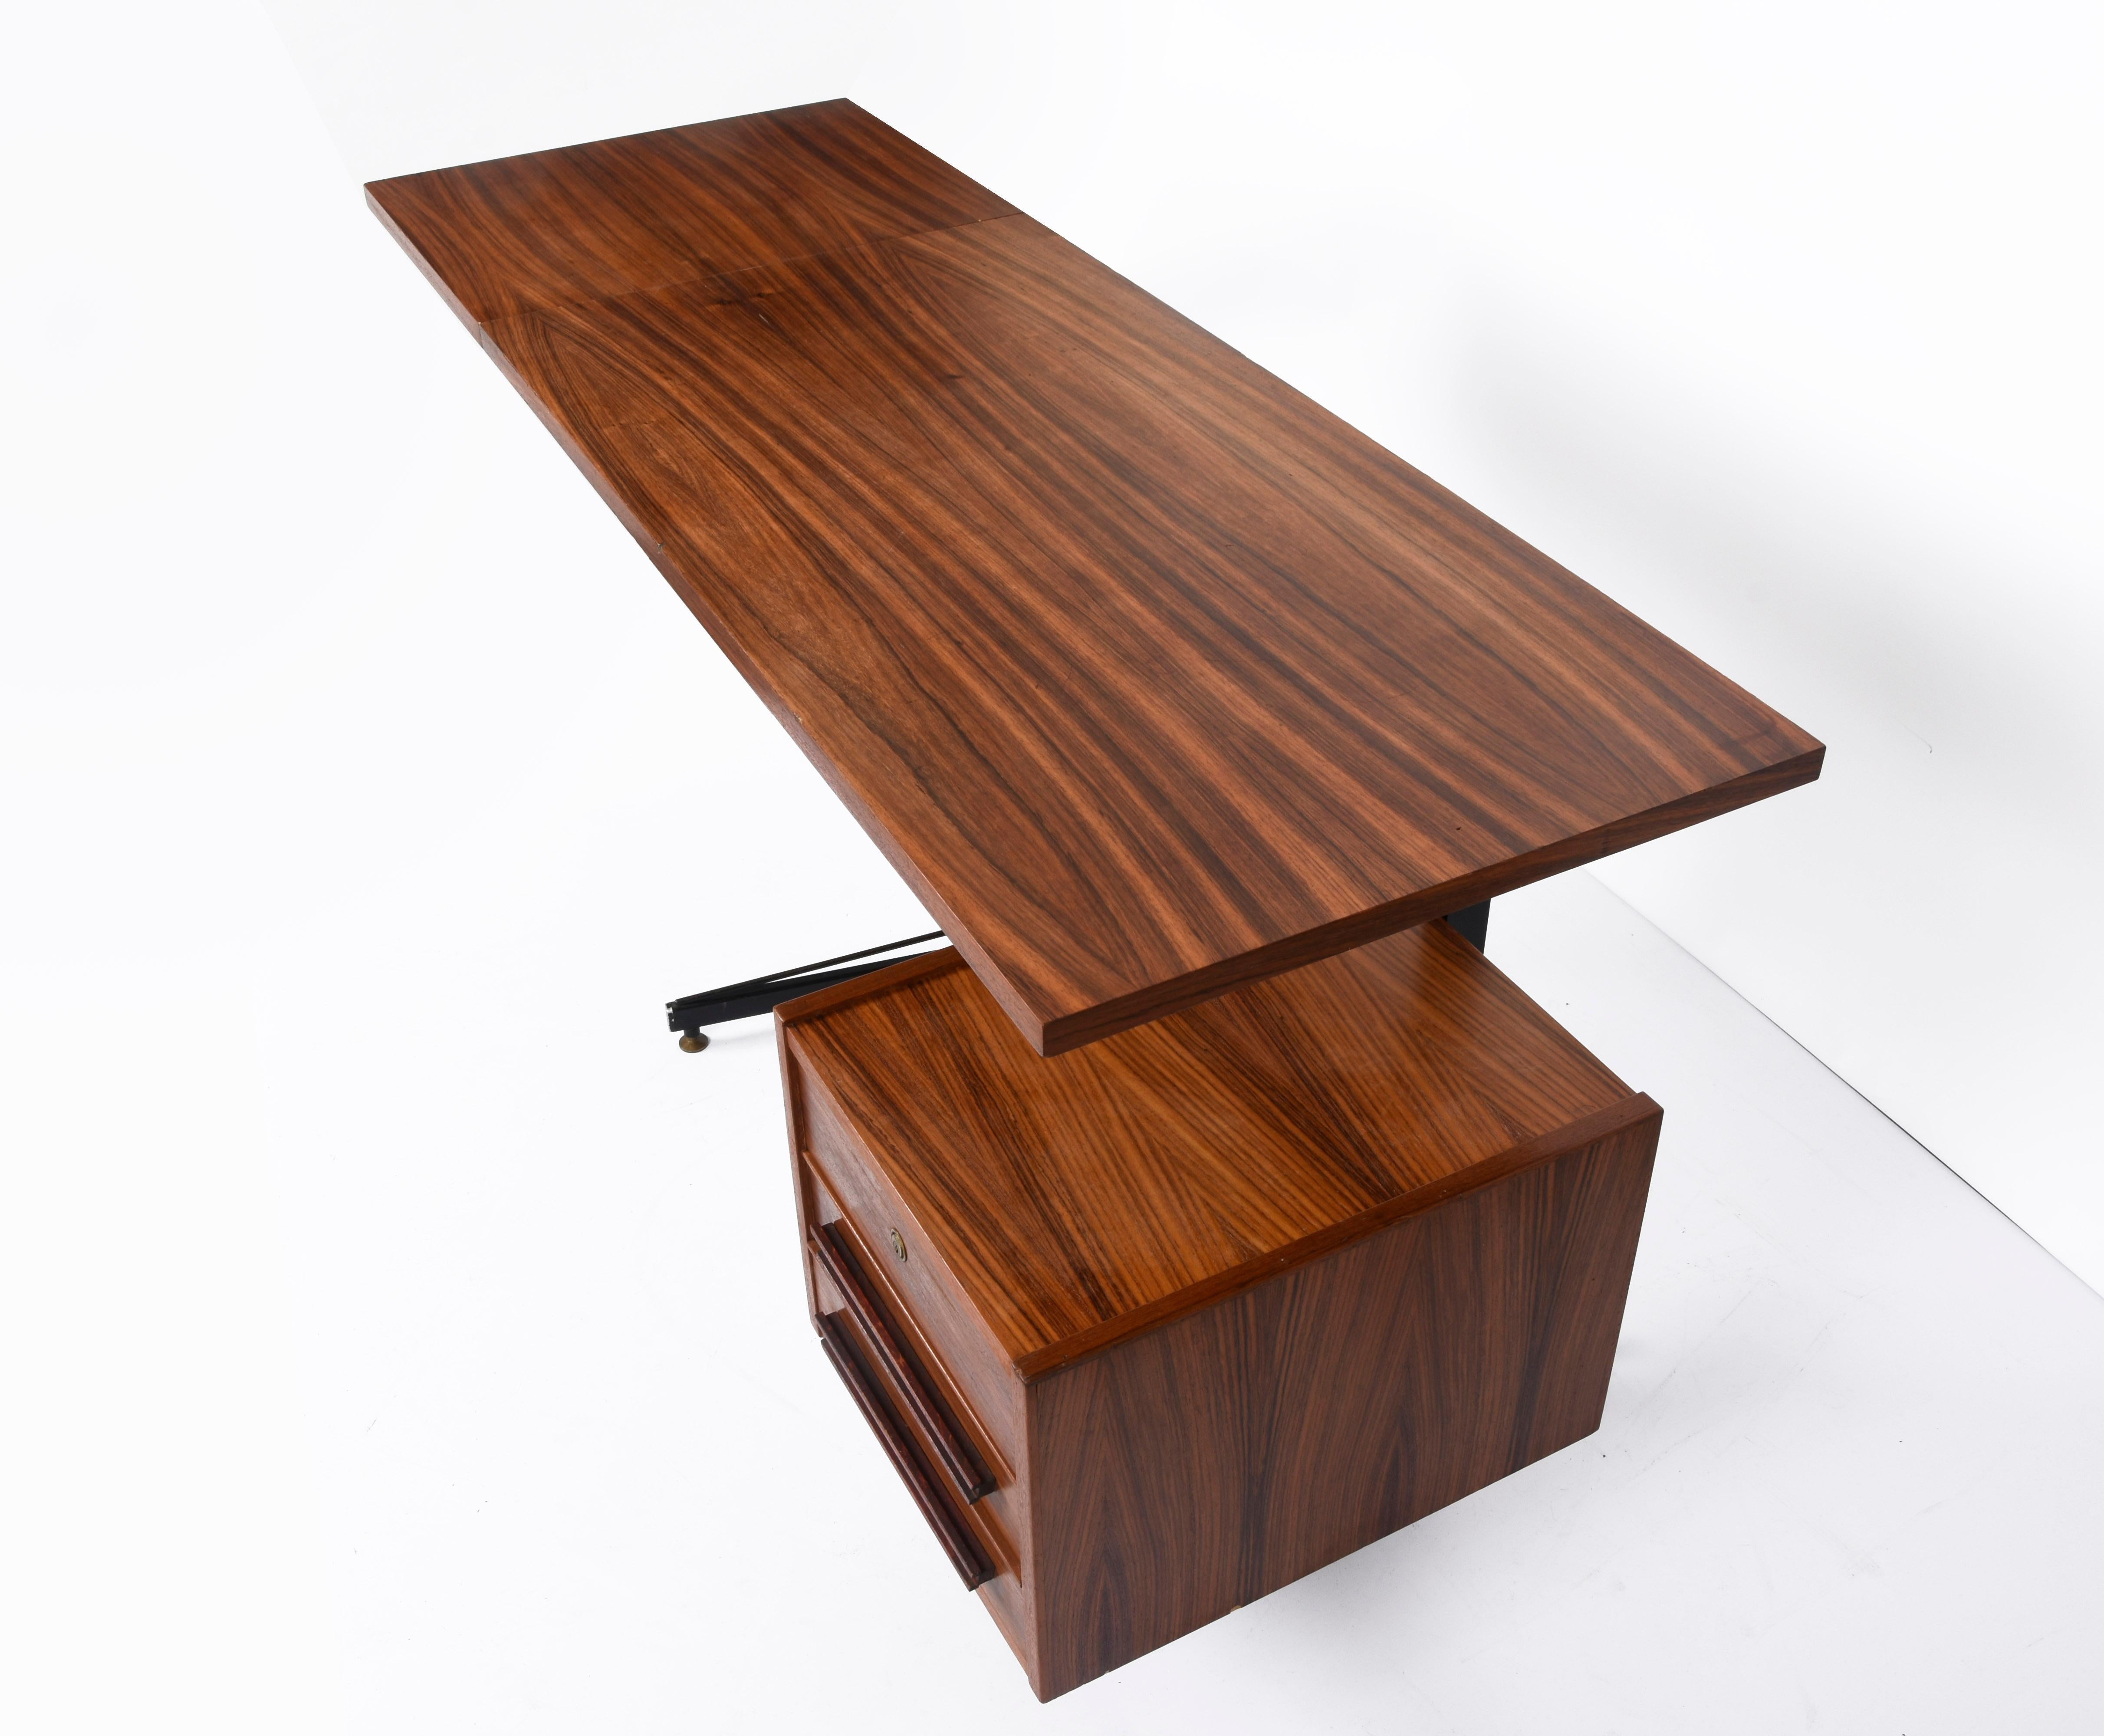 Wonderful Italian folding desk with drawers, the foldable top is made by a single piece of wood with marvellous wood grain that continues all over the top. This incredible piece was designed in Italy during the 1960s.

The desk has three drawers